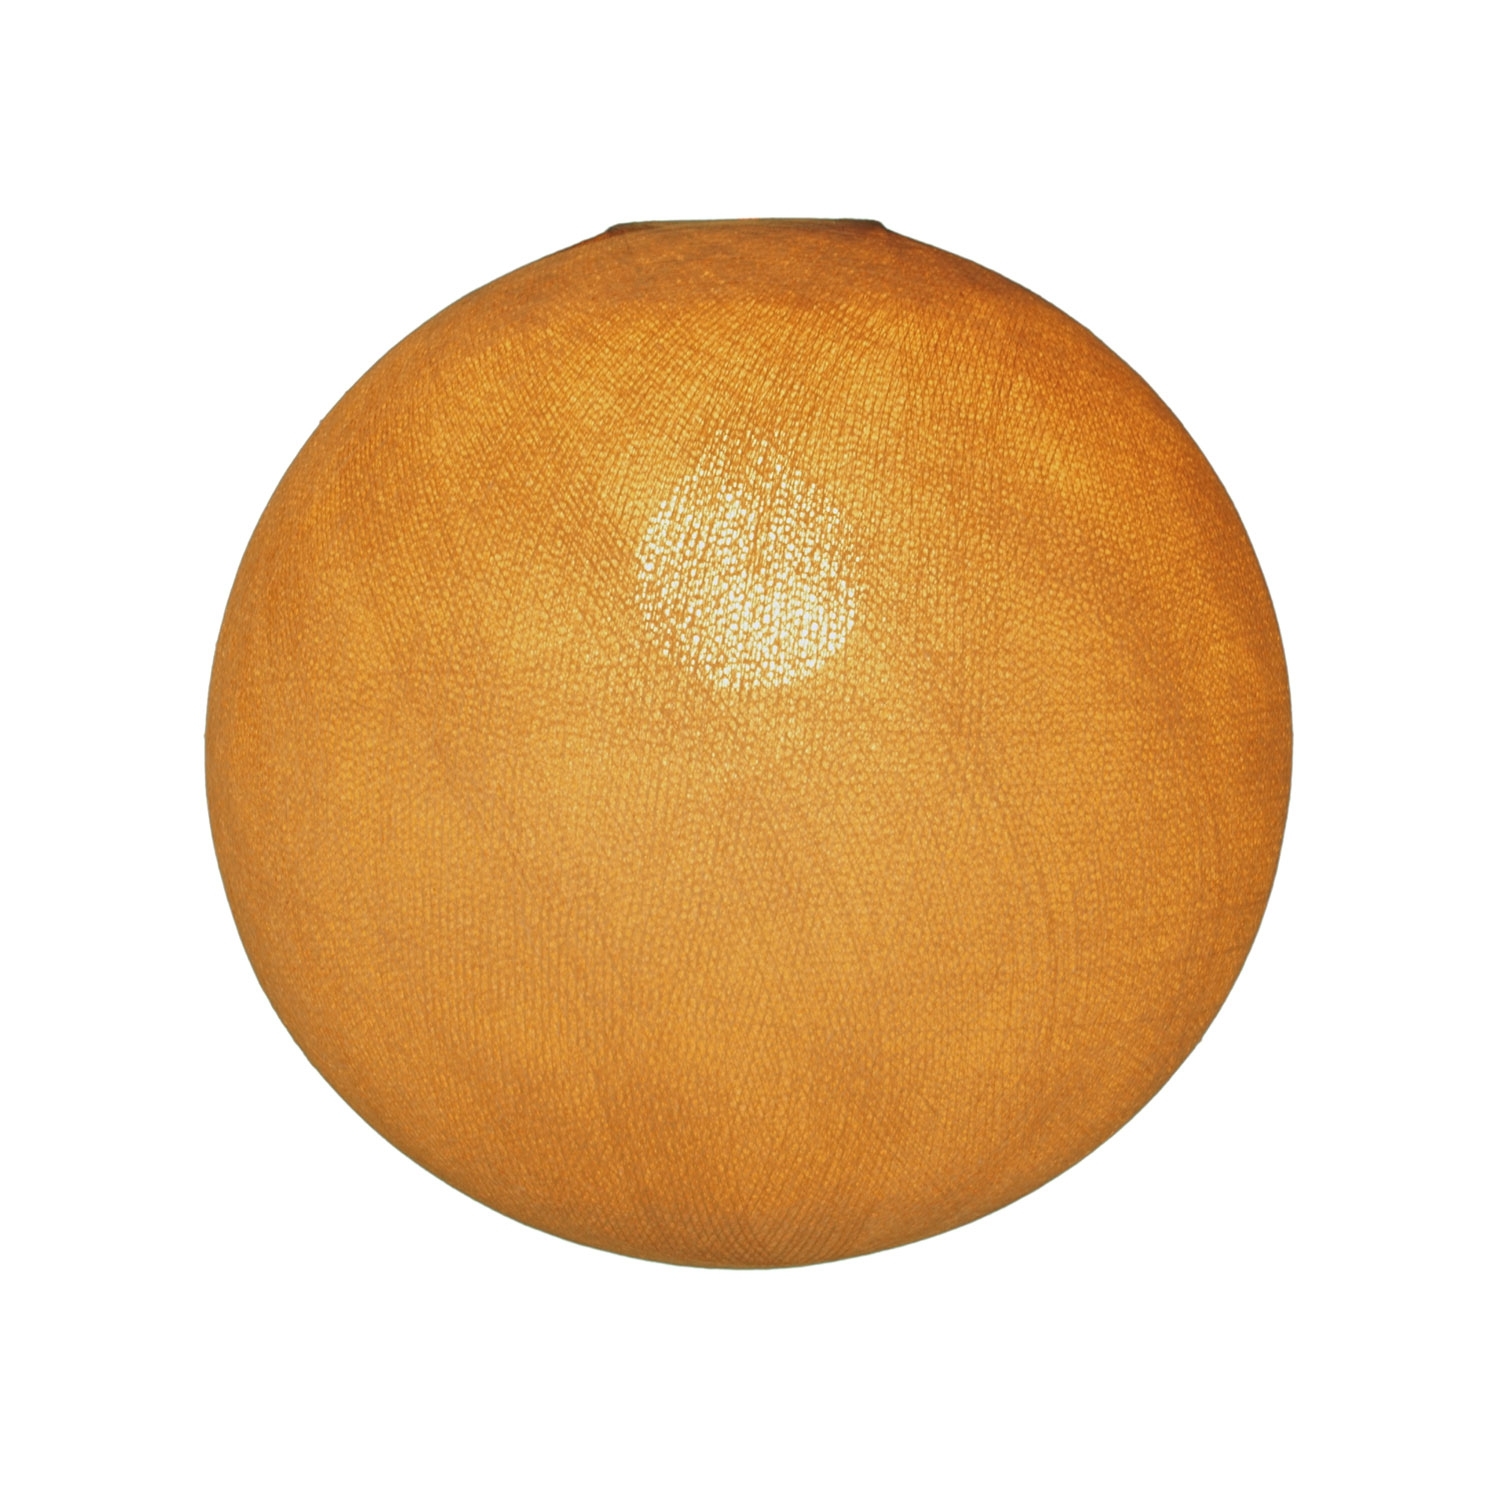 Round Foldi Shades - Handmade pendant light shades - Available in 3 sizes & 16 colors